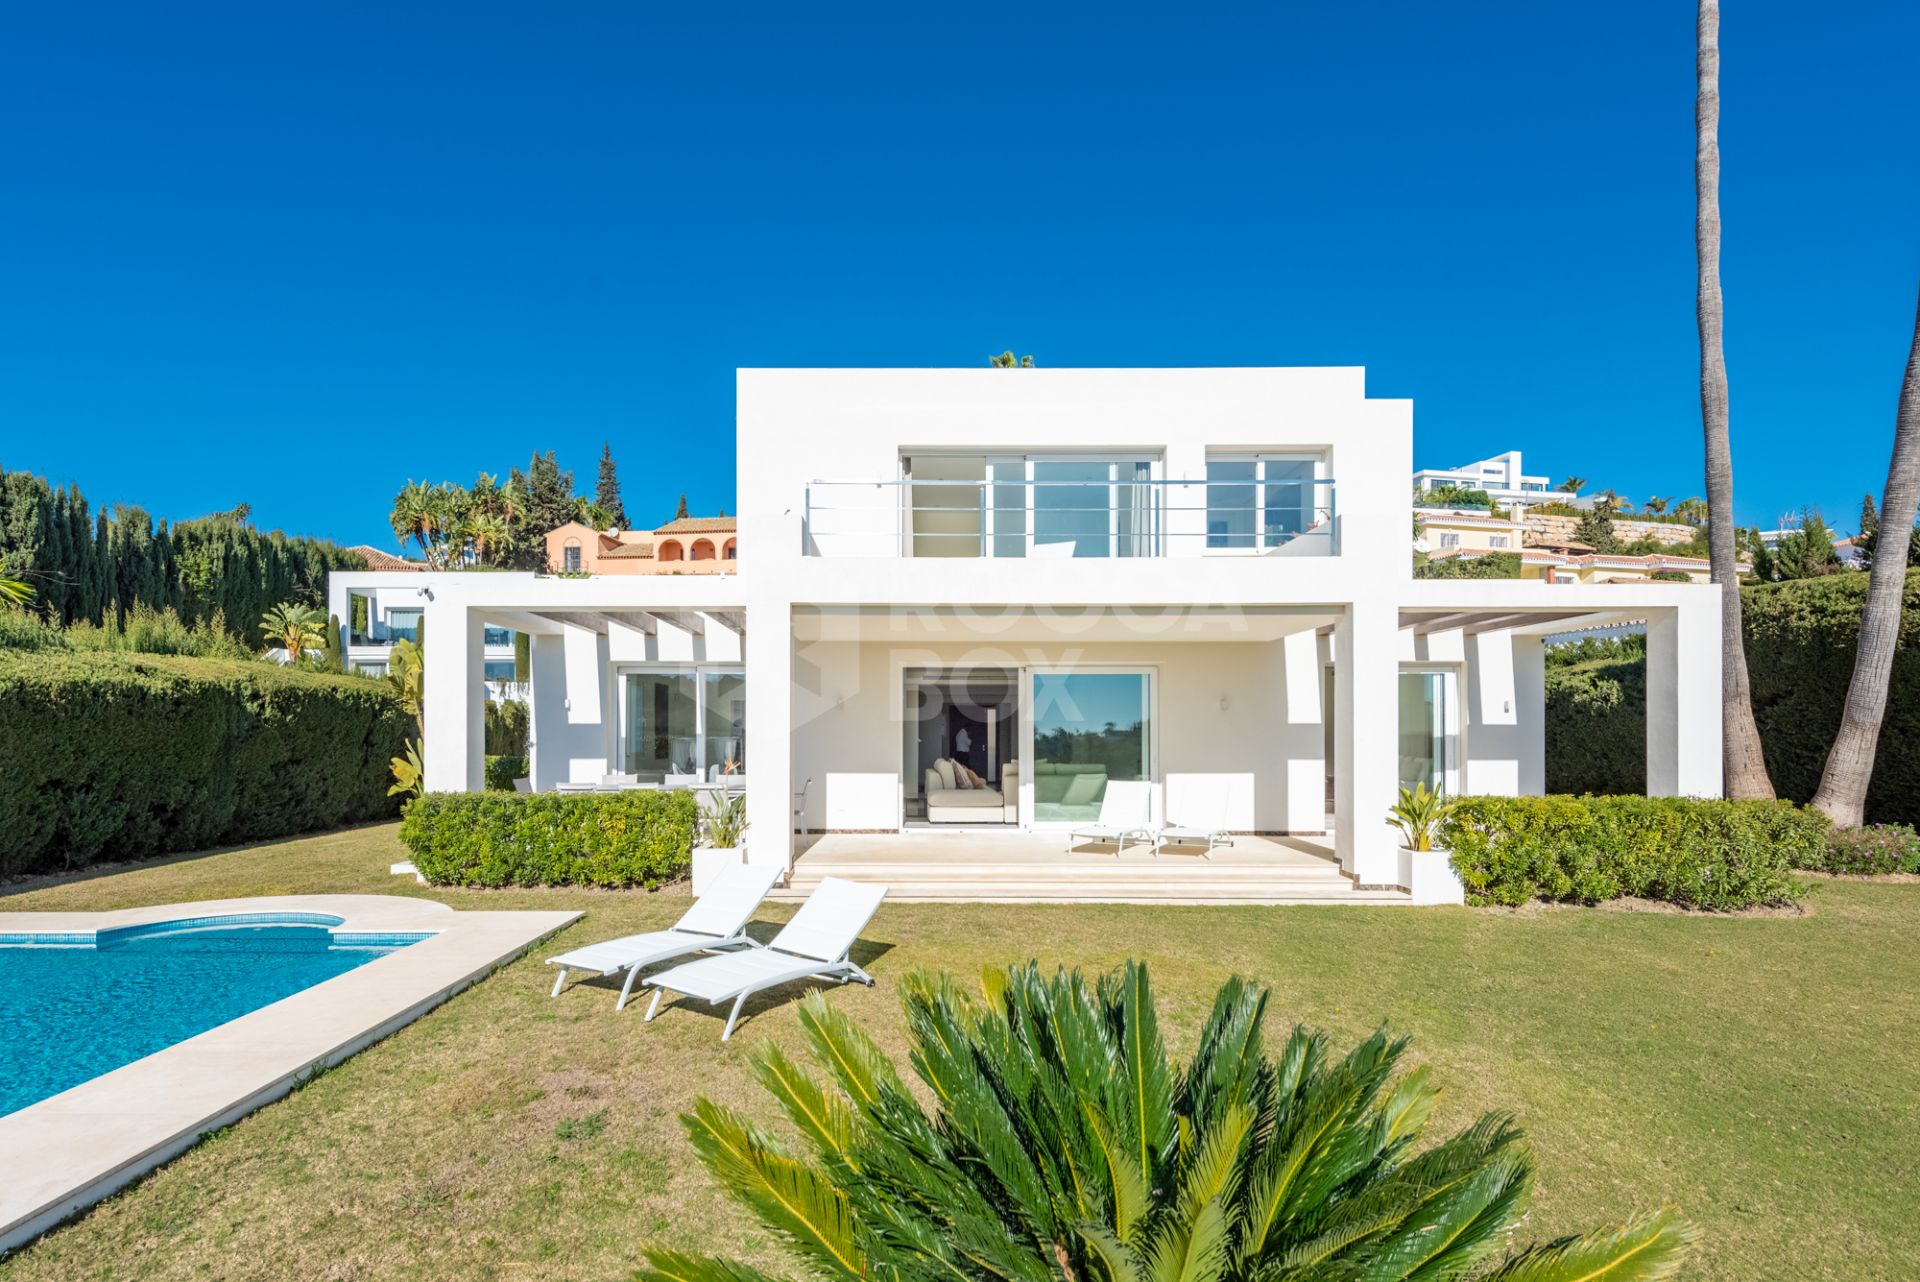 Totally refurbished contemporary-style villa located in a cul-de-sac, in a fabulous frontline golf enclave